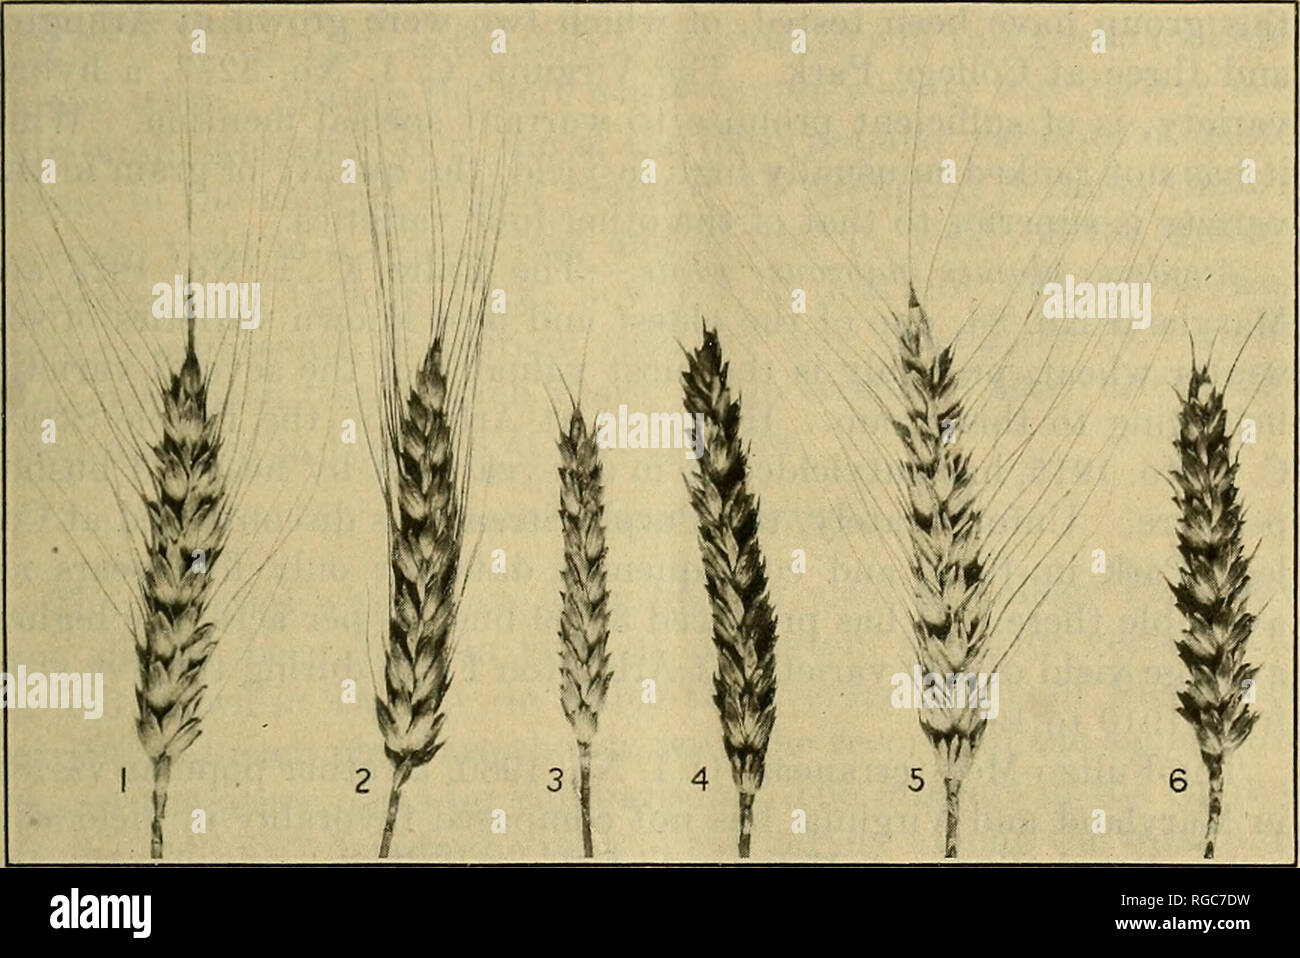 . Bulletin of the U.S. Department of Agriculture. Agriculture; Agriculture. CEREAL EXPERIMENTS IX MARYLAND AND VIRGINIA. 19 The wheals of this group are not adapted to ihe more humid areas of the United States. SOFT BED WINTER. Awned, glumes glabrous, white. -In order of yield, the leading varieties of this group that have been tested are the Lancaster, C. I. No. 1945; Mammoth Red, C. I. No. 2008; Dietz (Dietz Longberry), C. I. No. 1981; Bearded Purple Straw, C. I. No. 1911; and Stoner or &quot;Miracle,&quot; C. I. No. 2980 and Maryland No. 358. These varieties are all quite similar (fig. 2).  Stock Photo